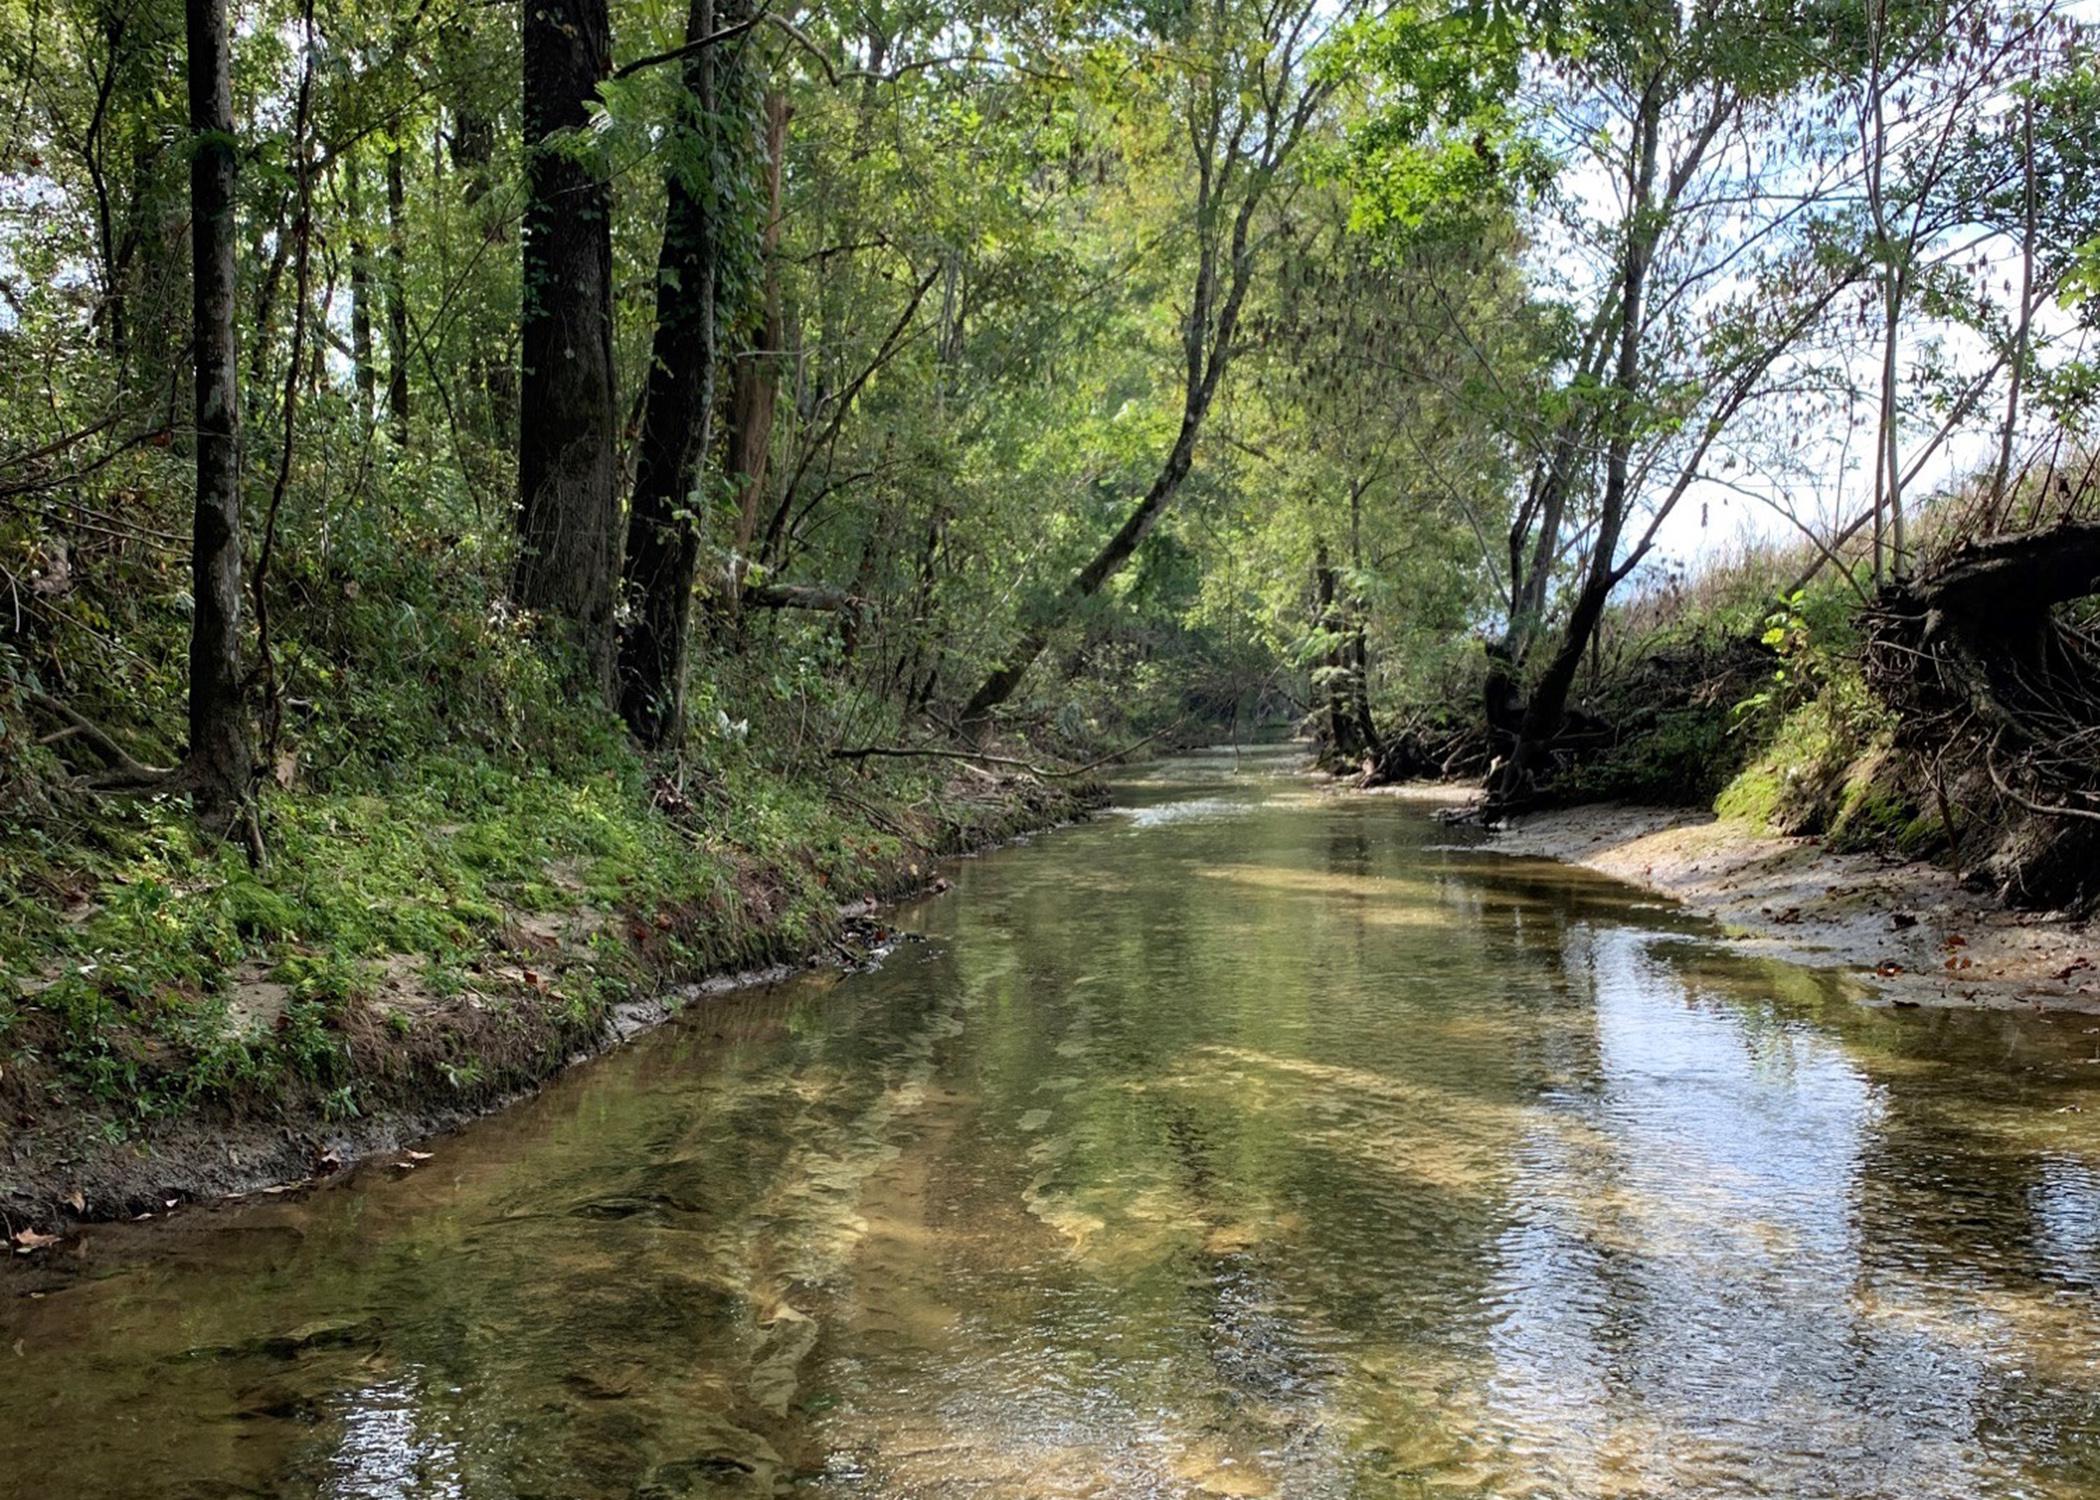 Creek with trees on the left providing shade and a steep bank on the right.